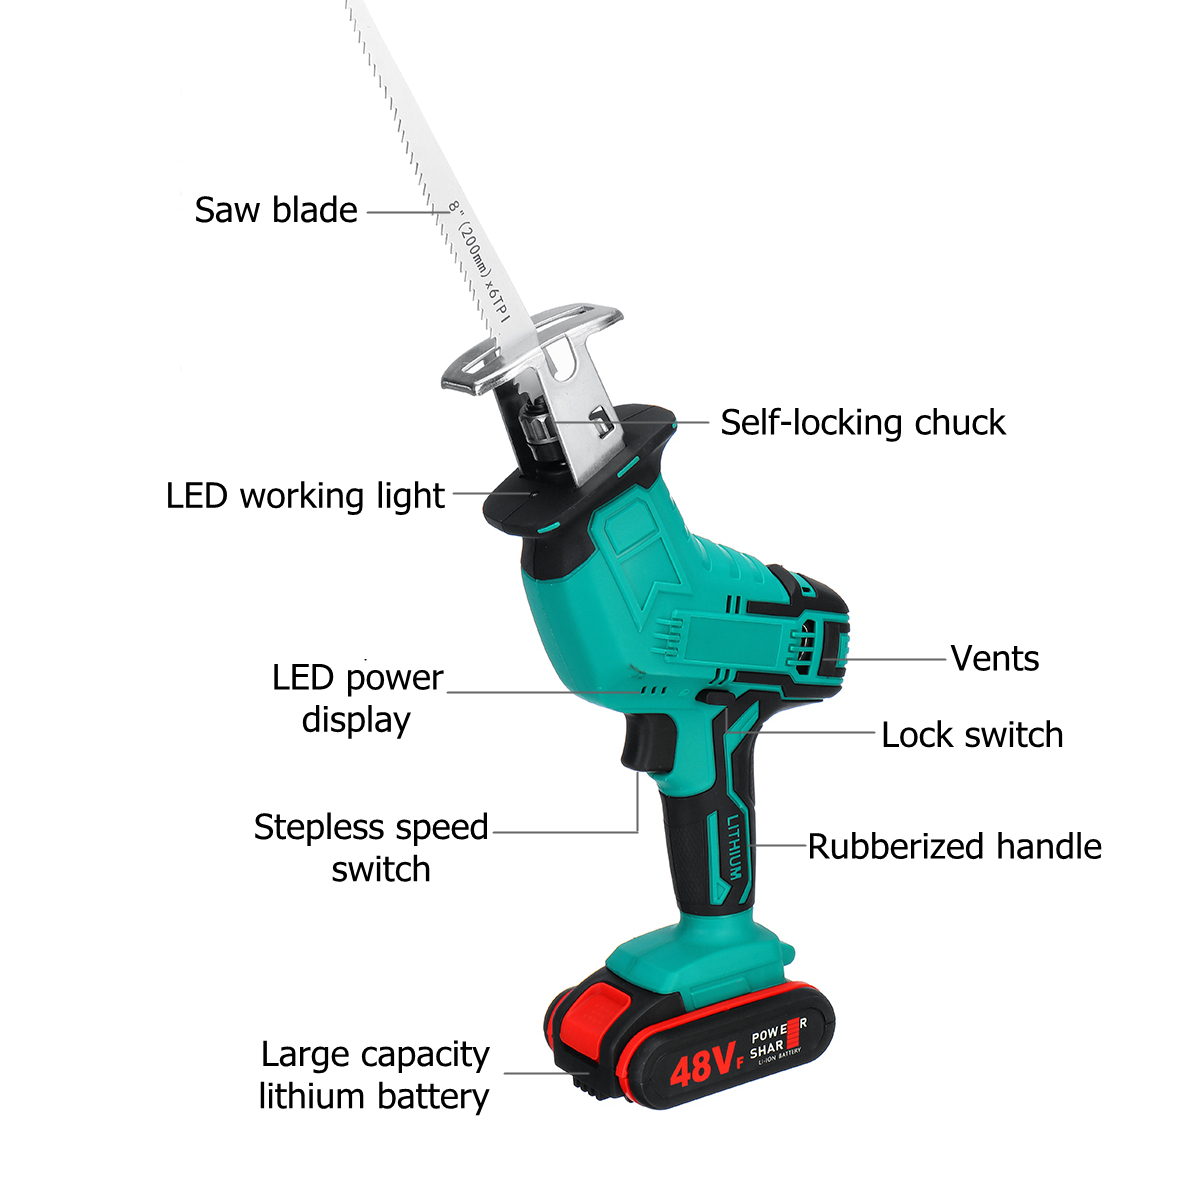 Electric-Cordless-Reciprocating-Saw-4-Blades-Battery-Charger-Saw-Power-Tool-1732002-4